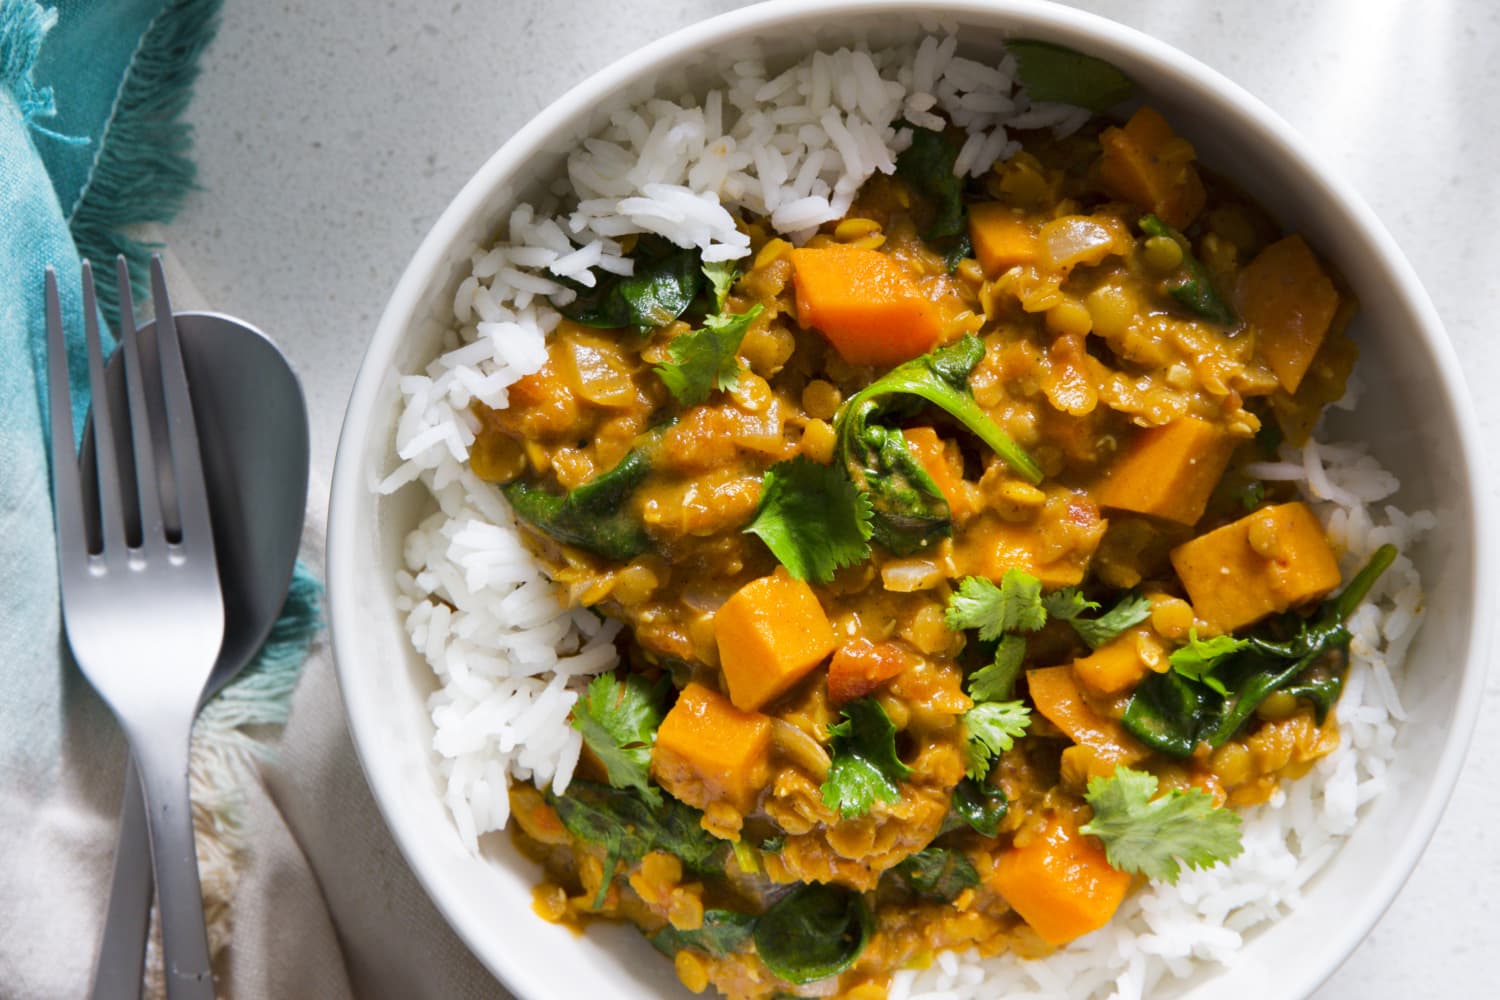 Lentil and Vegetable Coconut-Almond Curry Recipe | The Kitchn